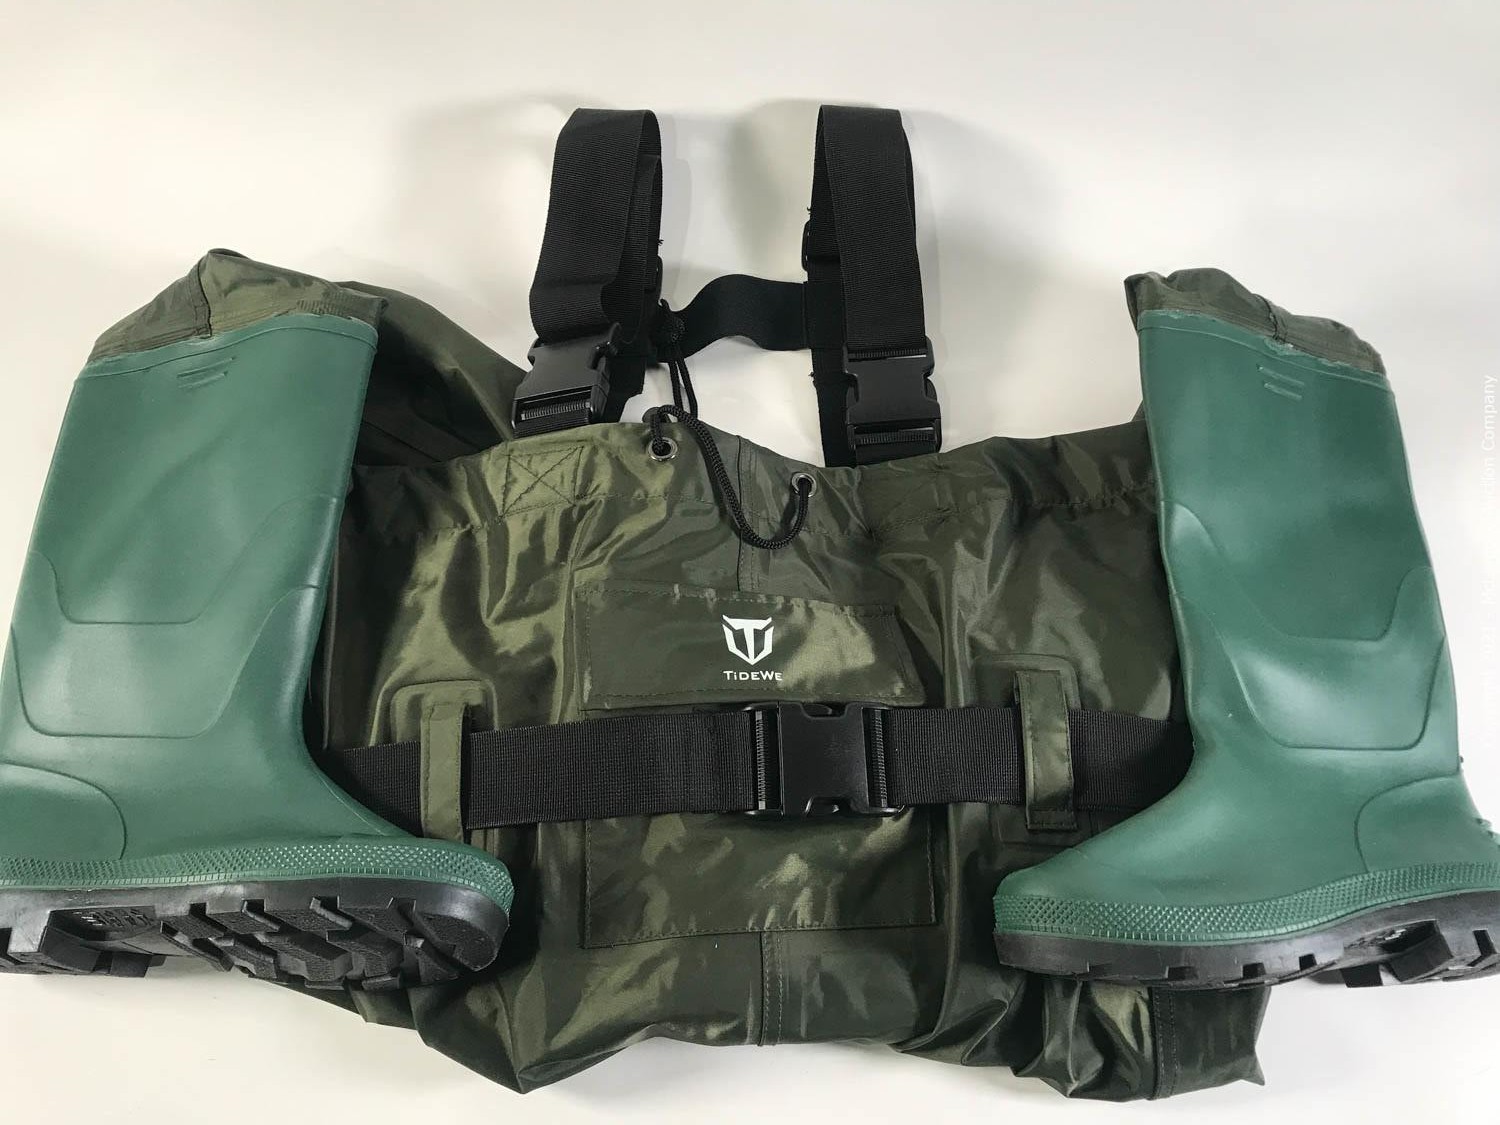 McLemore Auction Company - Auction: Electronics, Gaming, Home Goods, Beauty  Products, Toys, Power Tools, Clothing, Accessories, Appliances and More  ITEM: TIDEWE Bootfoot Chest Wader, 2-Ply Nylon/PVC Waterproof Fishing &  Hunting Waders with